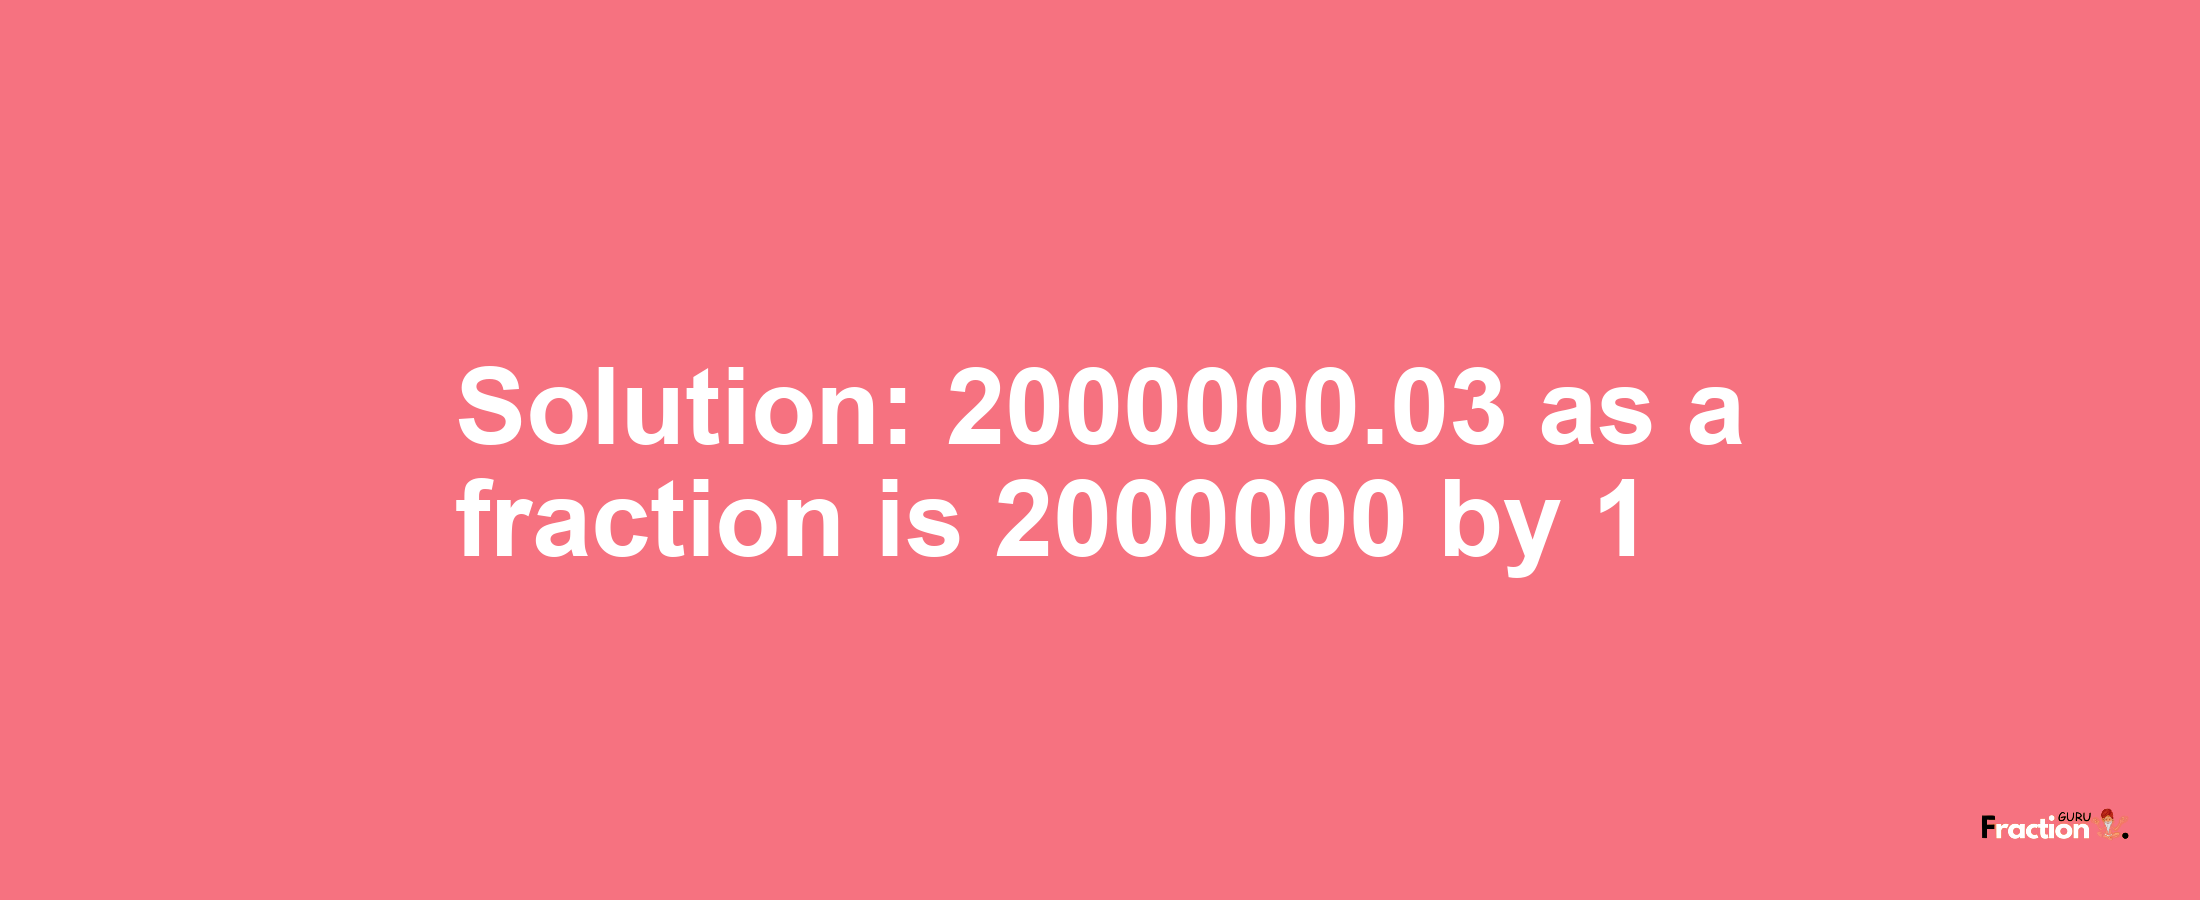 Solution:2000000.03 as a fraction is 2000000/1